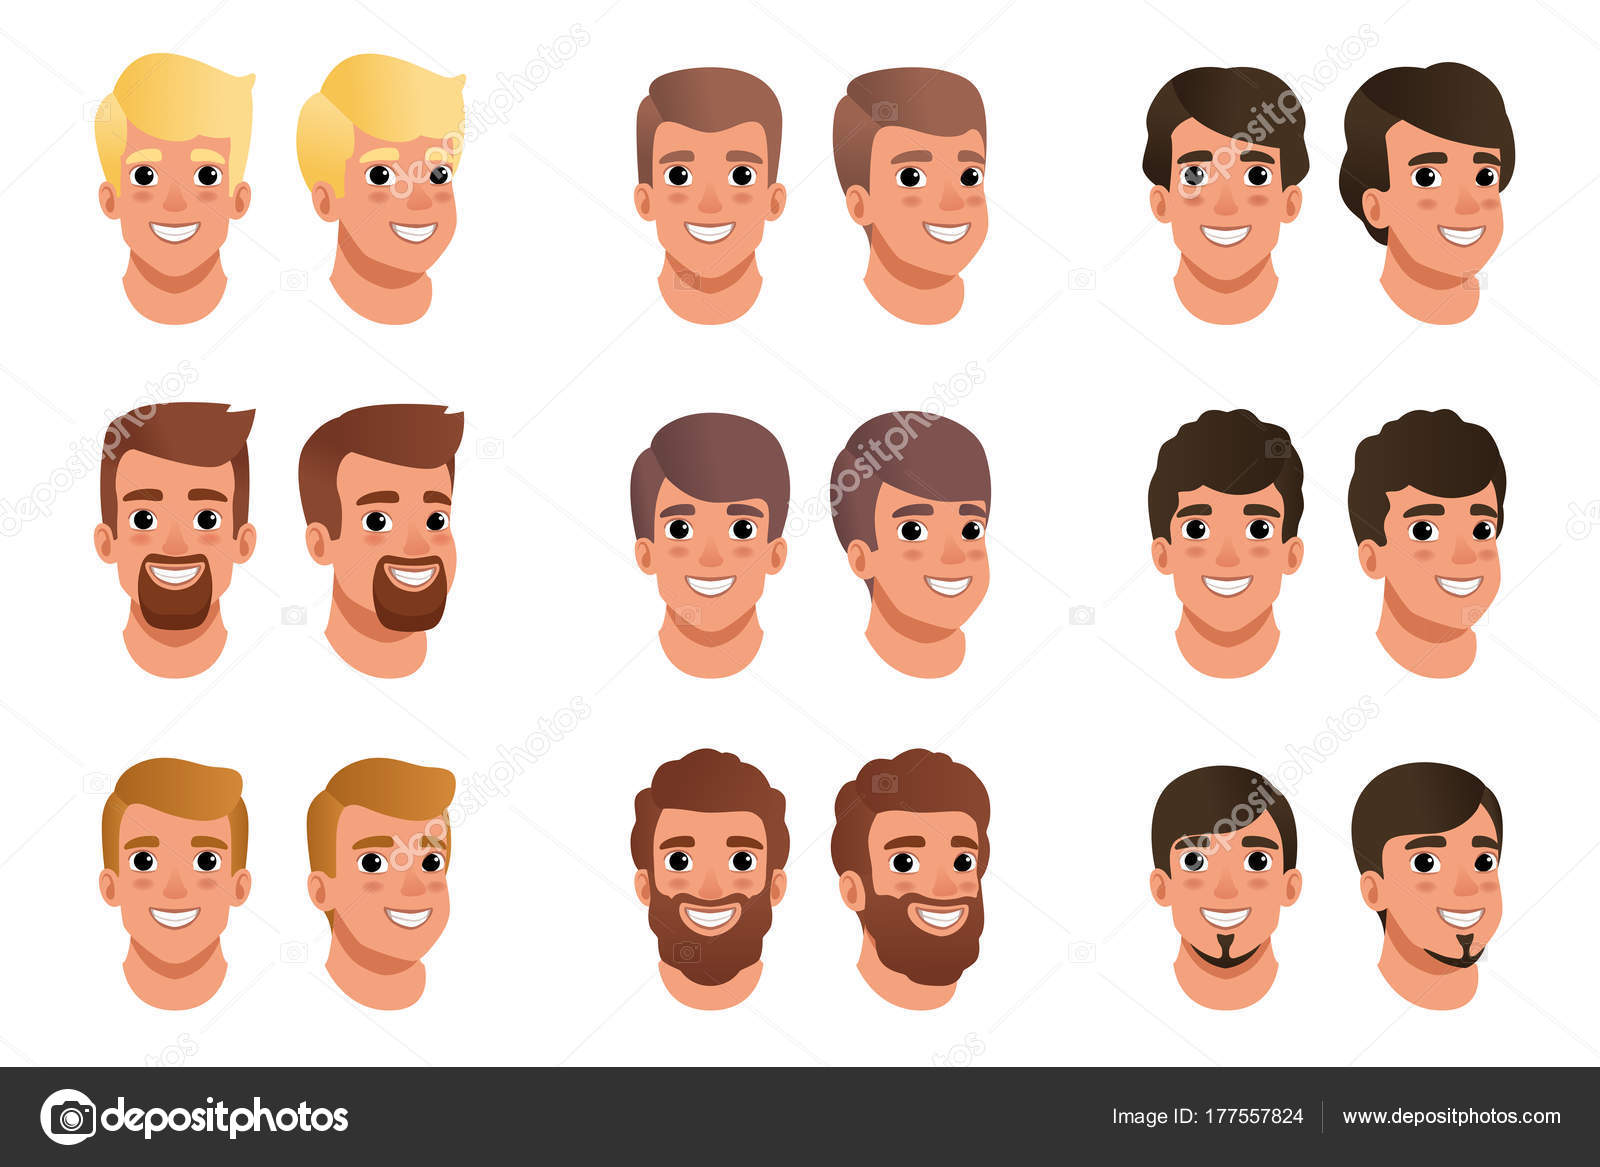 Pictures Hair Colors Man Cartoon Set Of Men Avatars With